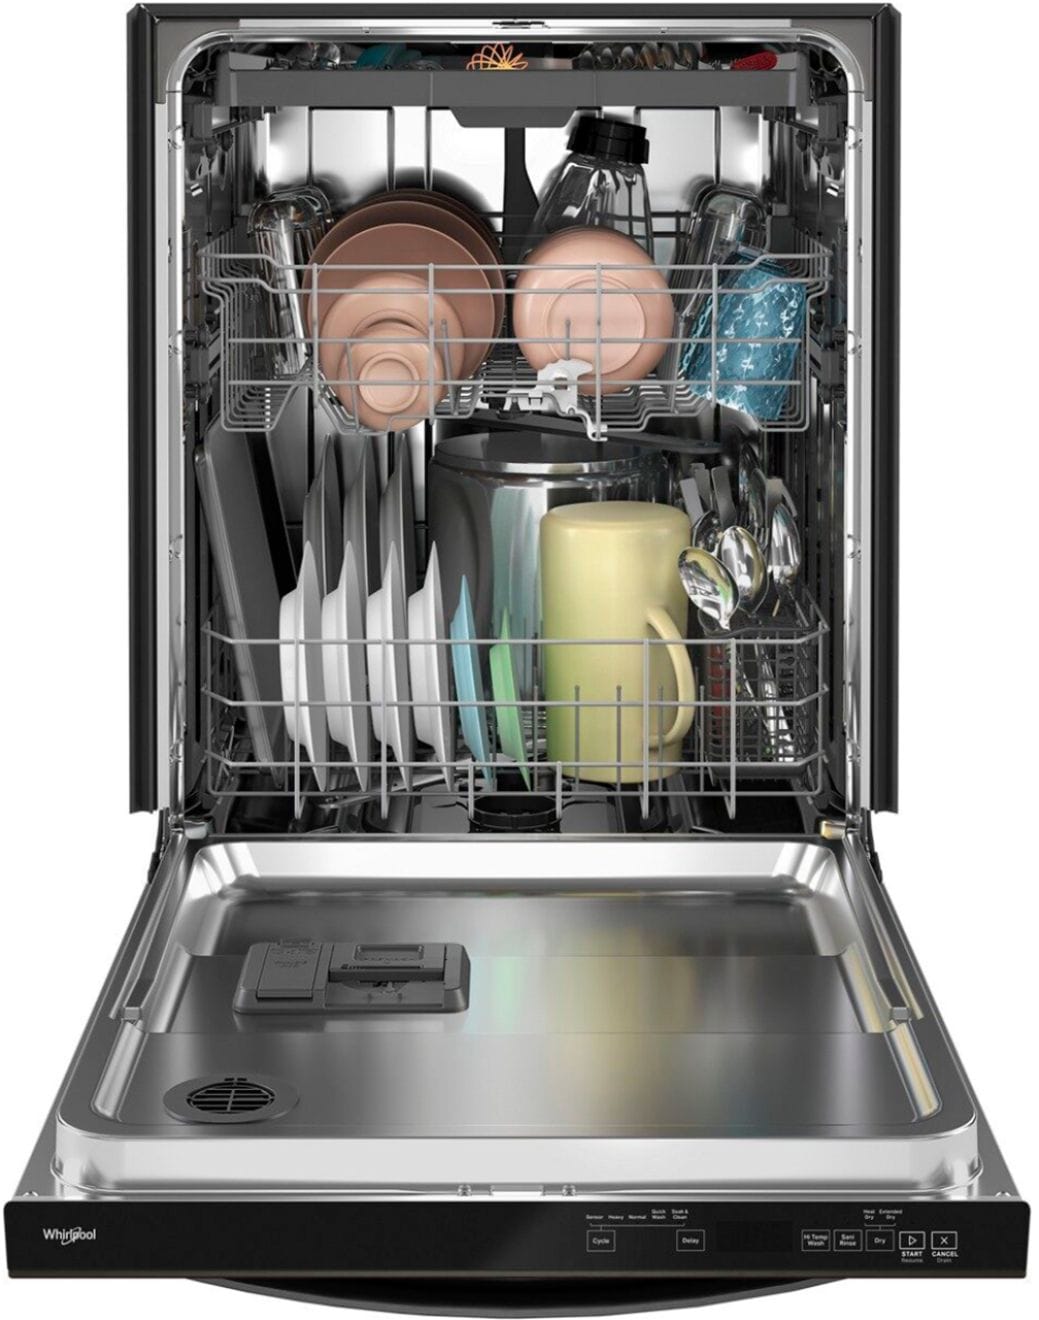 Whirlpool - 24" Top Control Built-In Dishwasher with Stainless Steel Tub, Large Capacity, 3rd Rack, 47 dBA - Black stainless steel_13